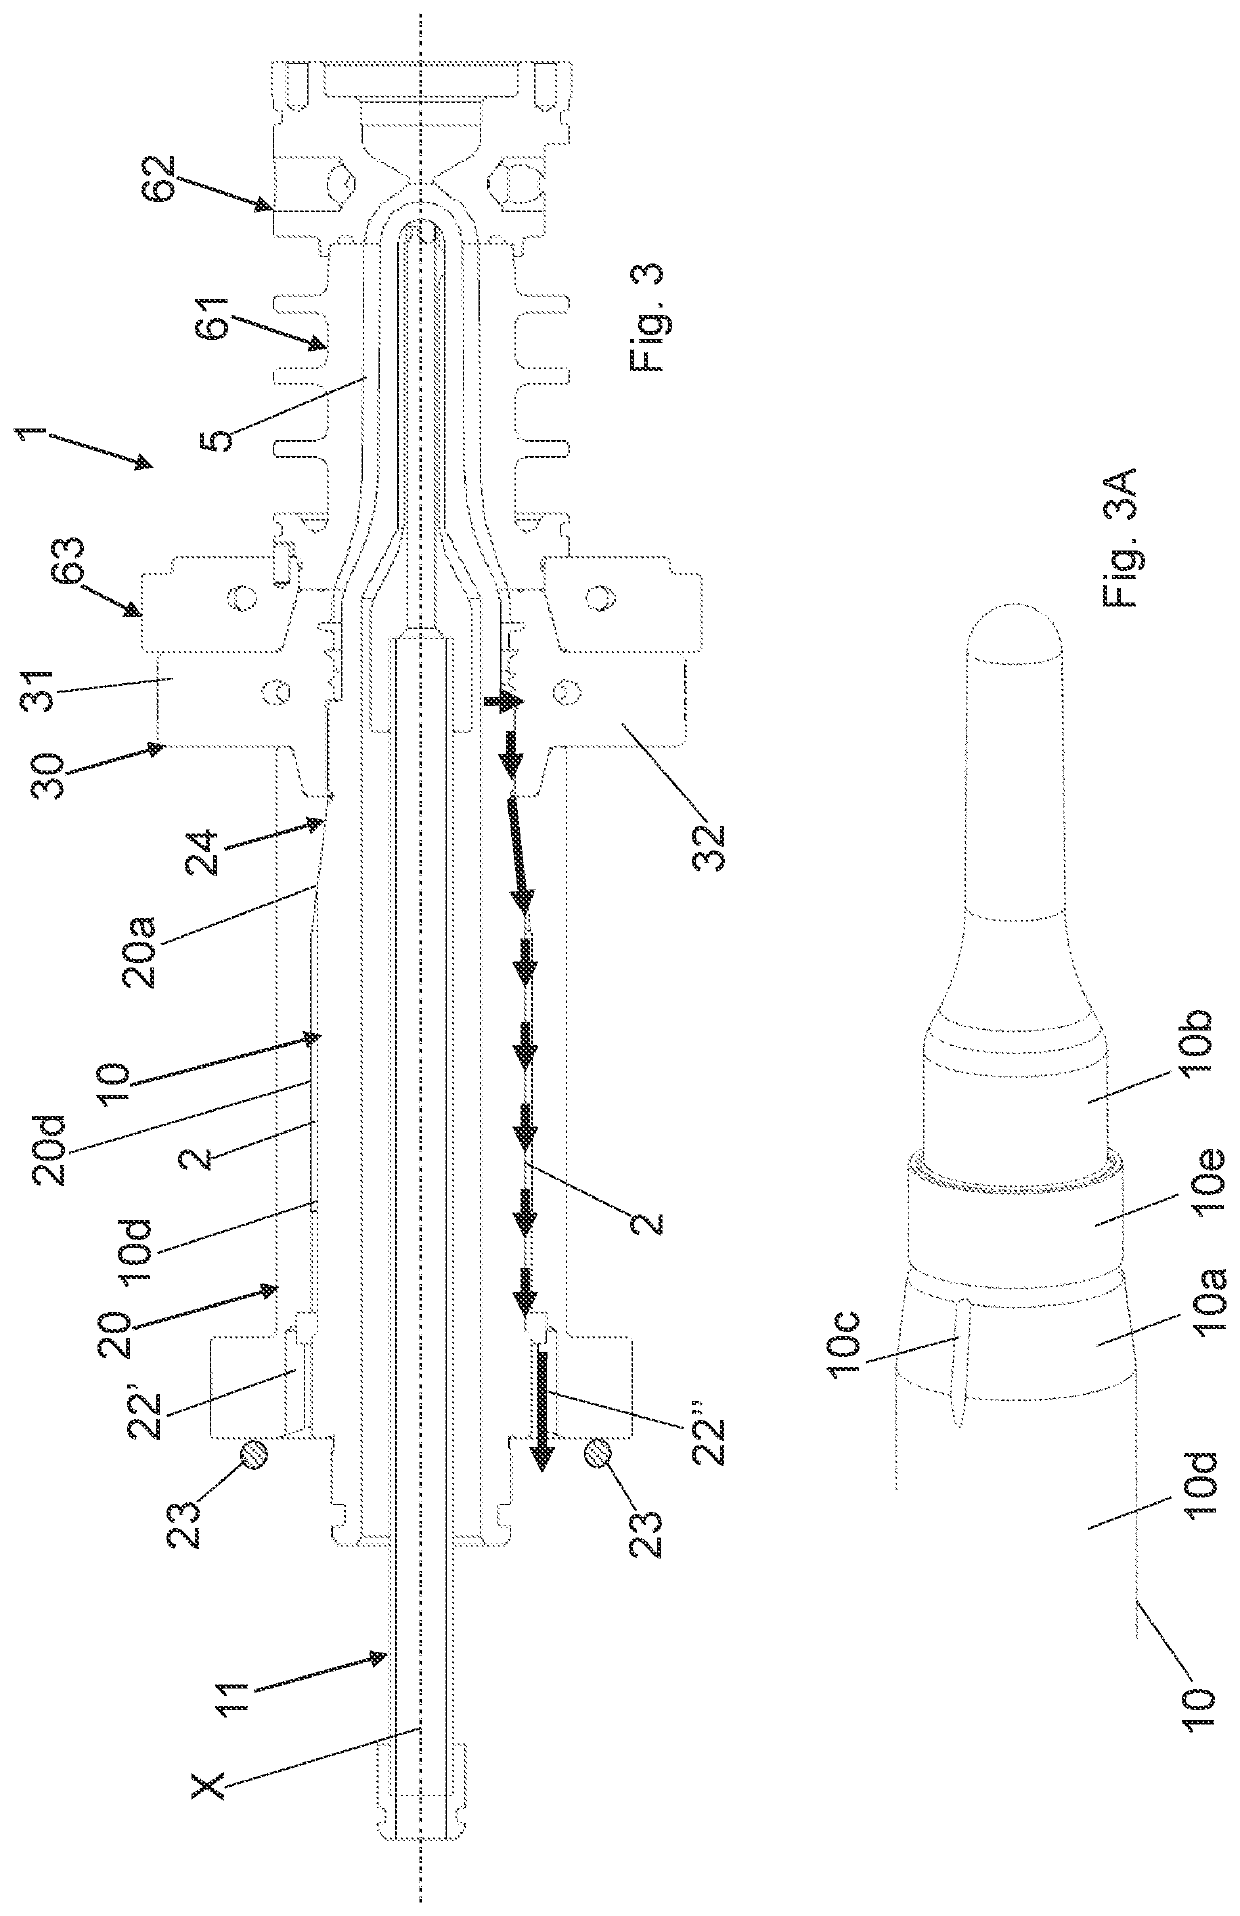 Apparatus and process for molding bottle preforms